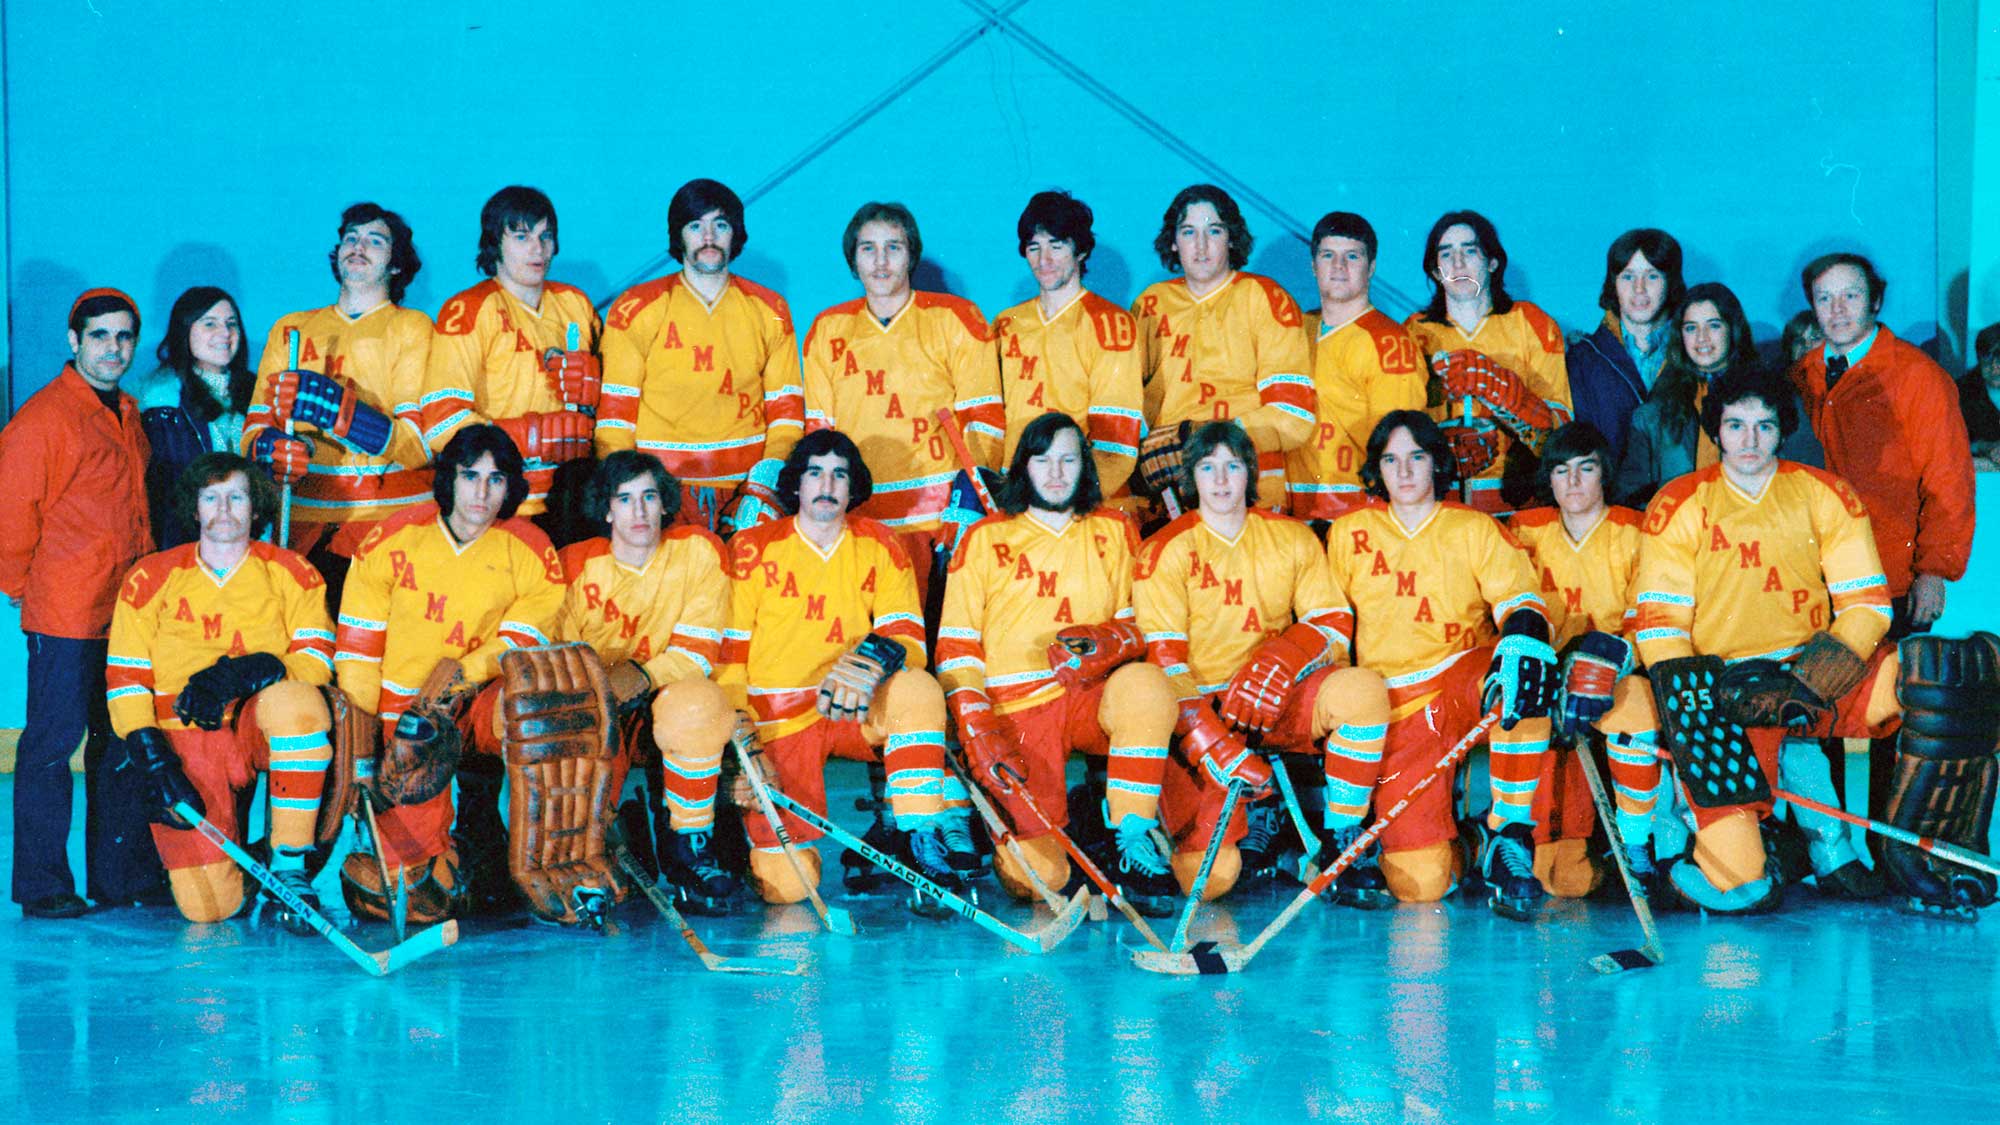 1975 Ice Hockey group standing on the ice, wearing yellow and red uniforms